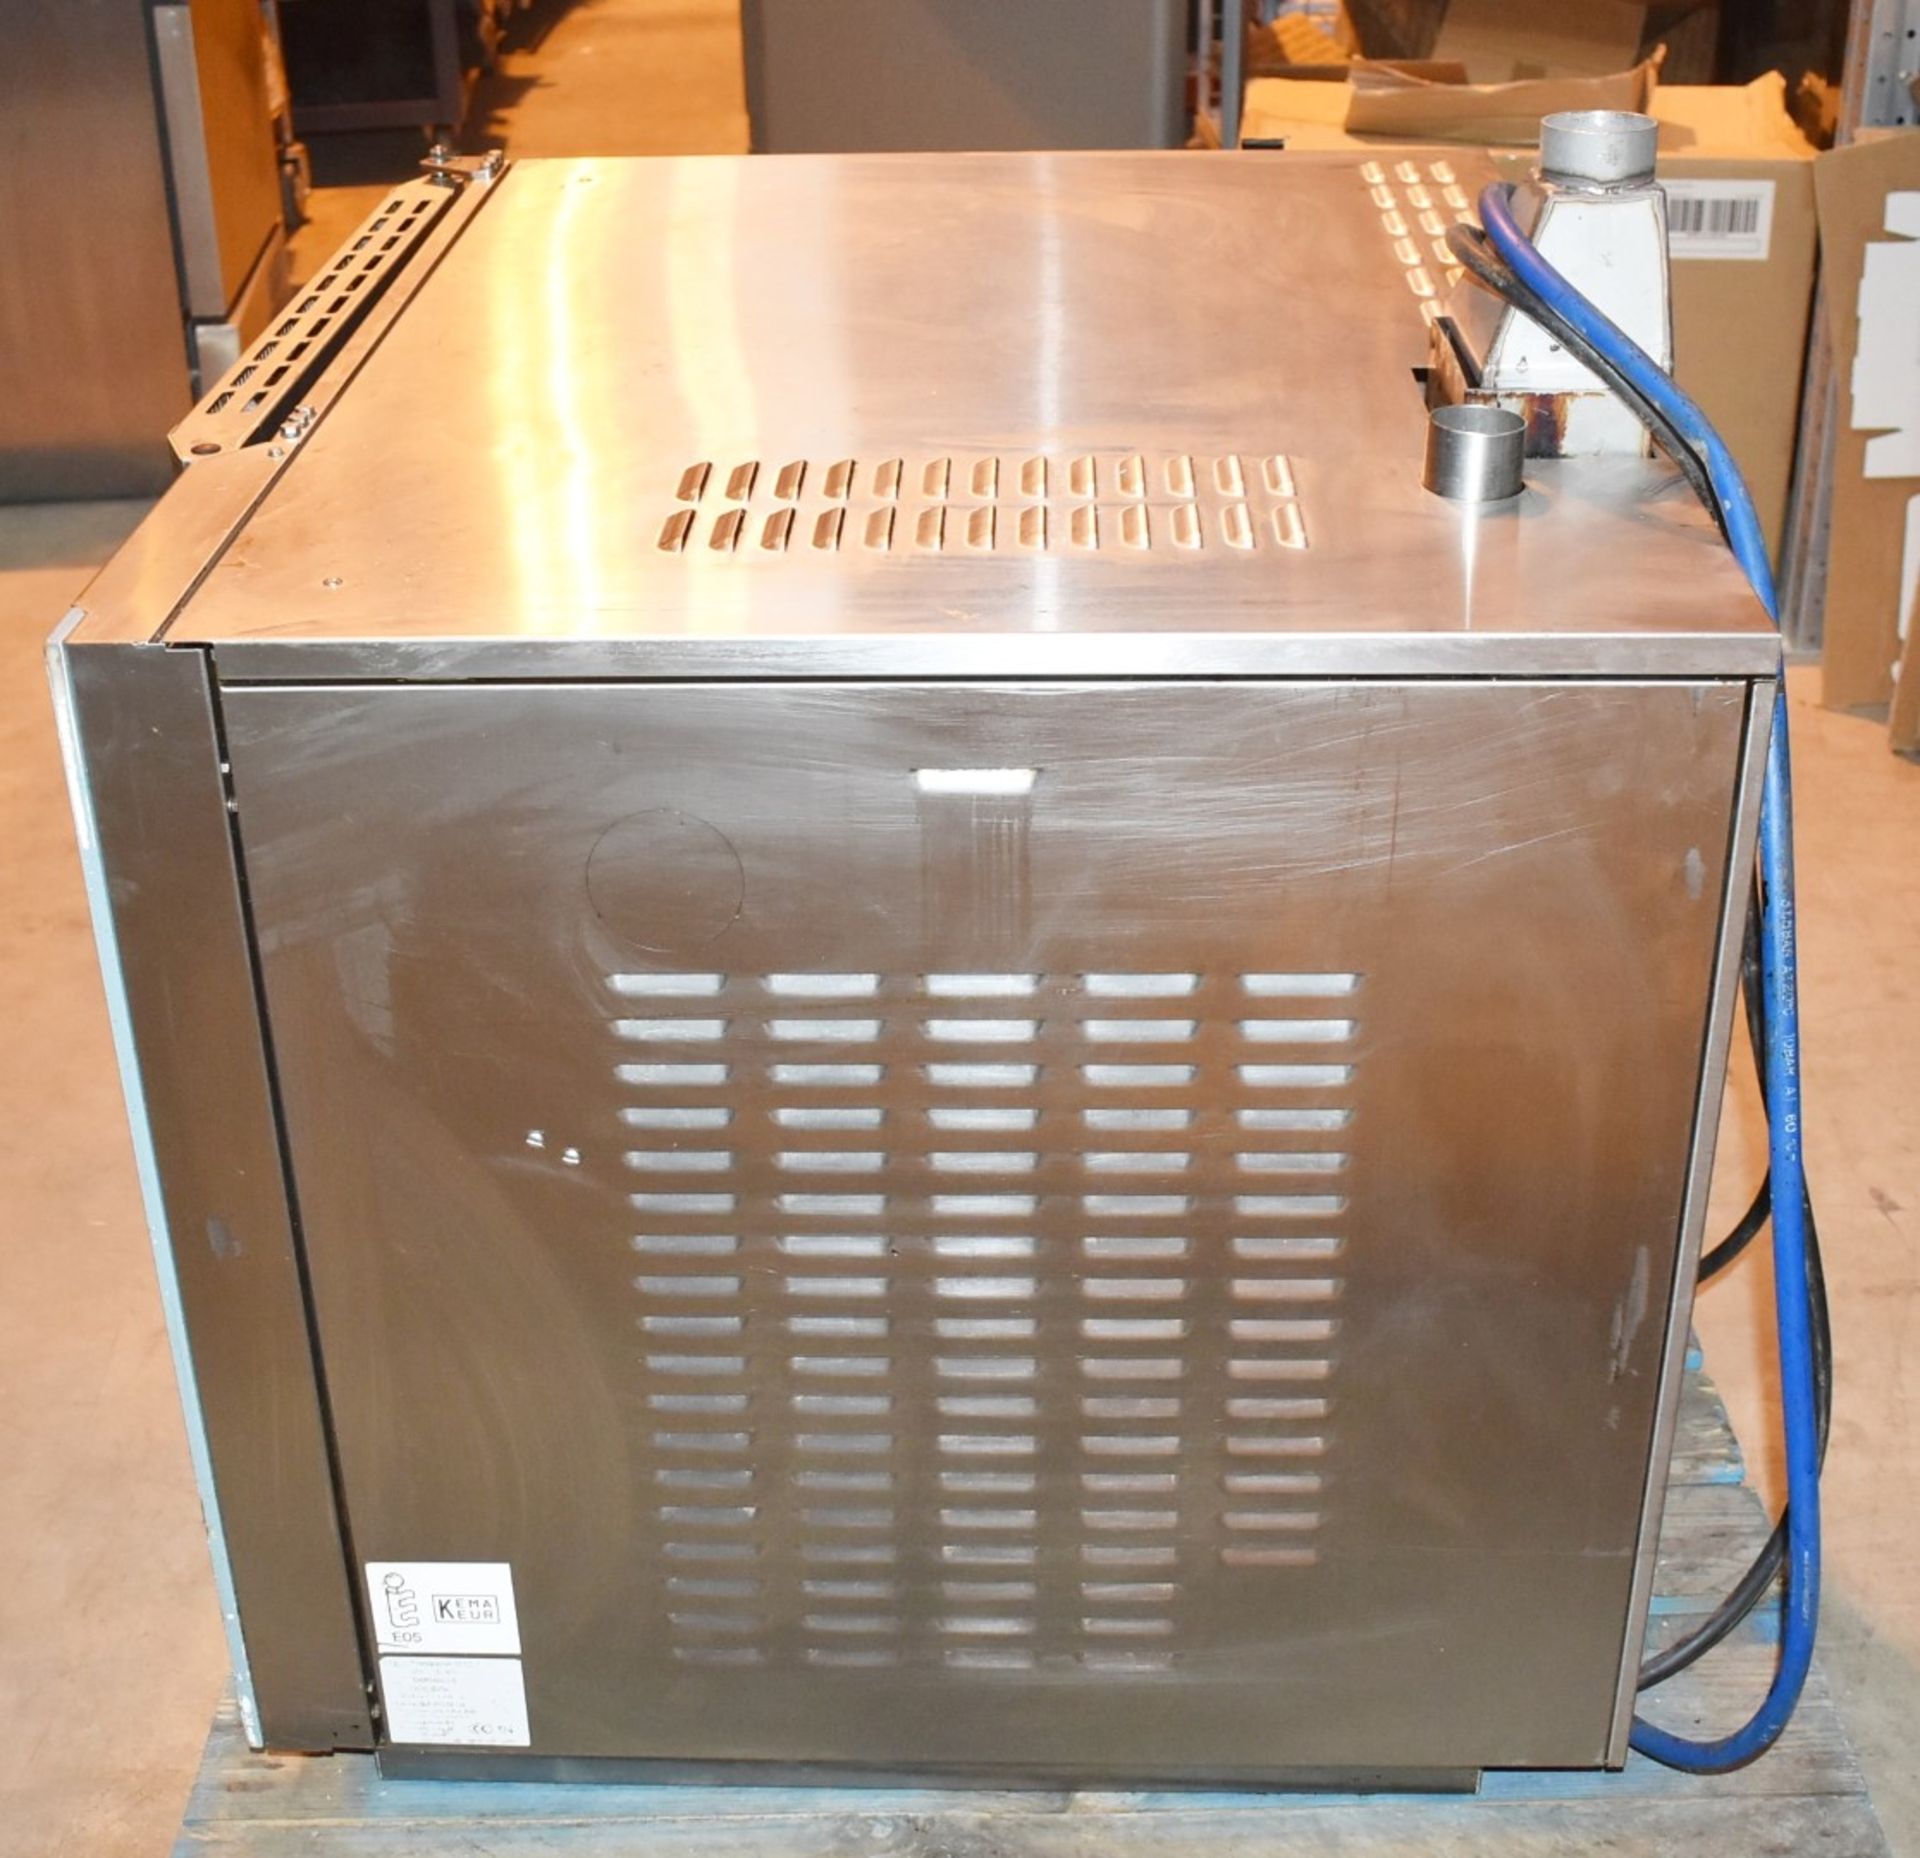 1 x Leventi Combimat mk3.1 Mastermind 6 Grid Combi Steam Oven - 3 Phase - Recently Removed From a - Image 6 of 11